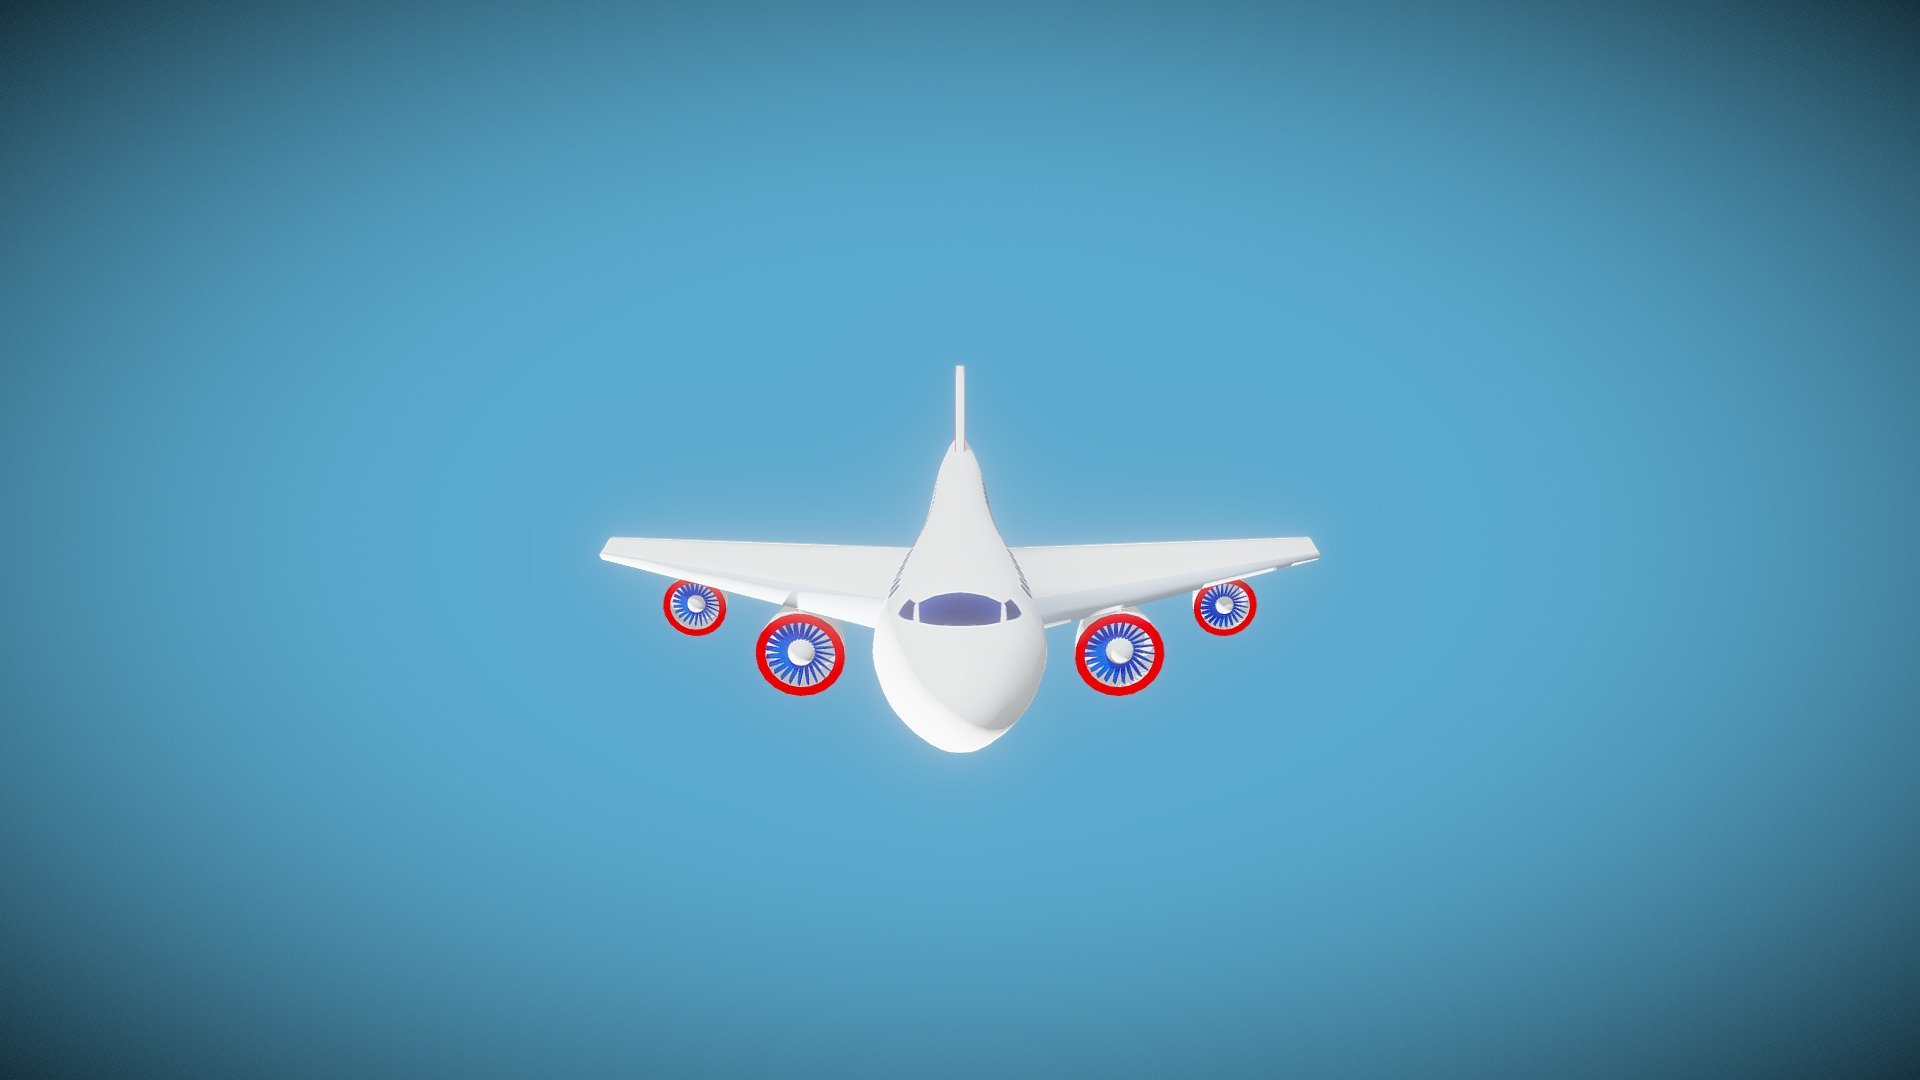 Stylized cartoon plane made in blender.
2000 faces are in this file 3d model